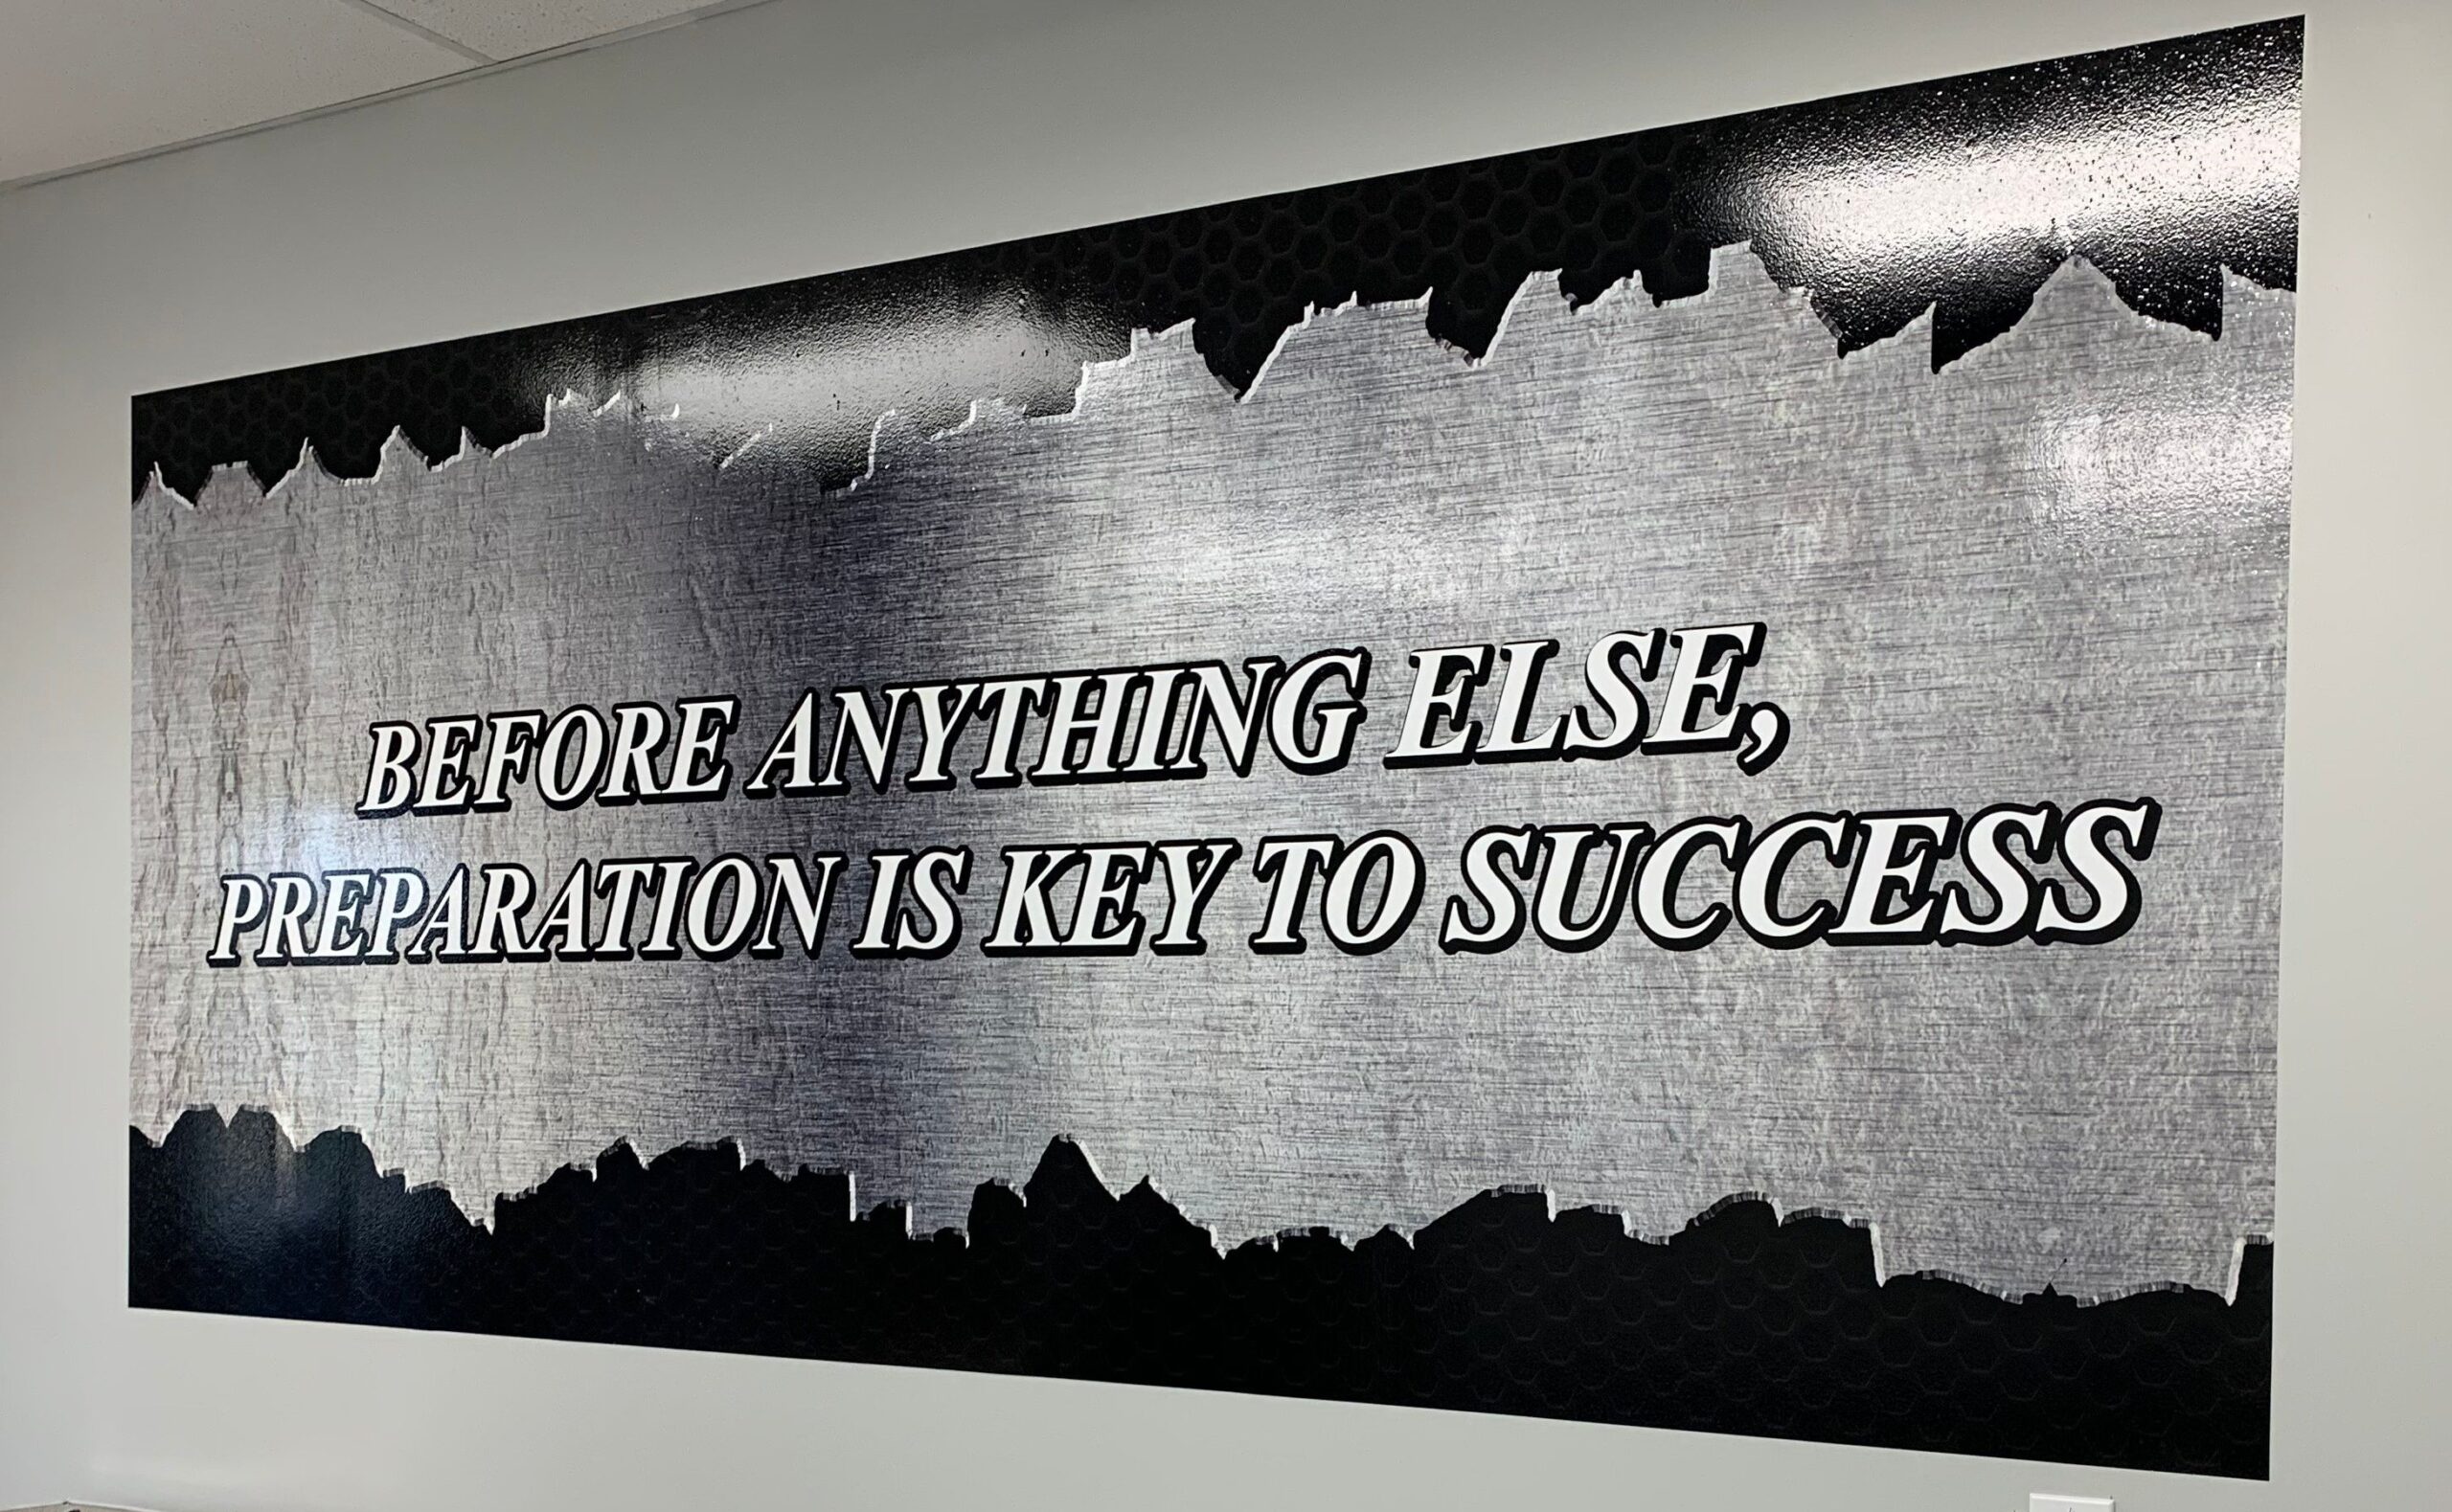 A custom glossy gray and black interior vinyl wall wrap that communicates a positive encouraging message, depicted on the inside wall of a home office building.